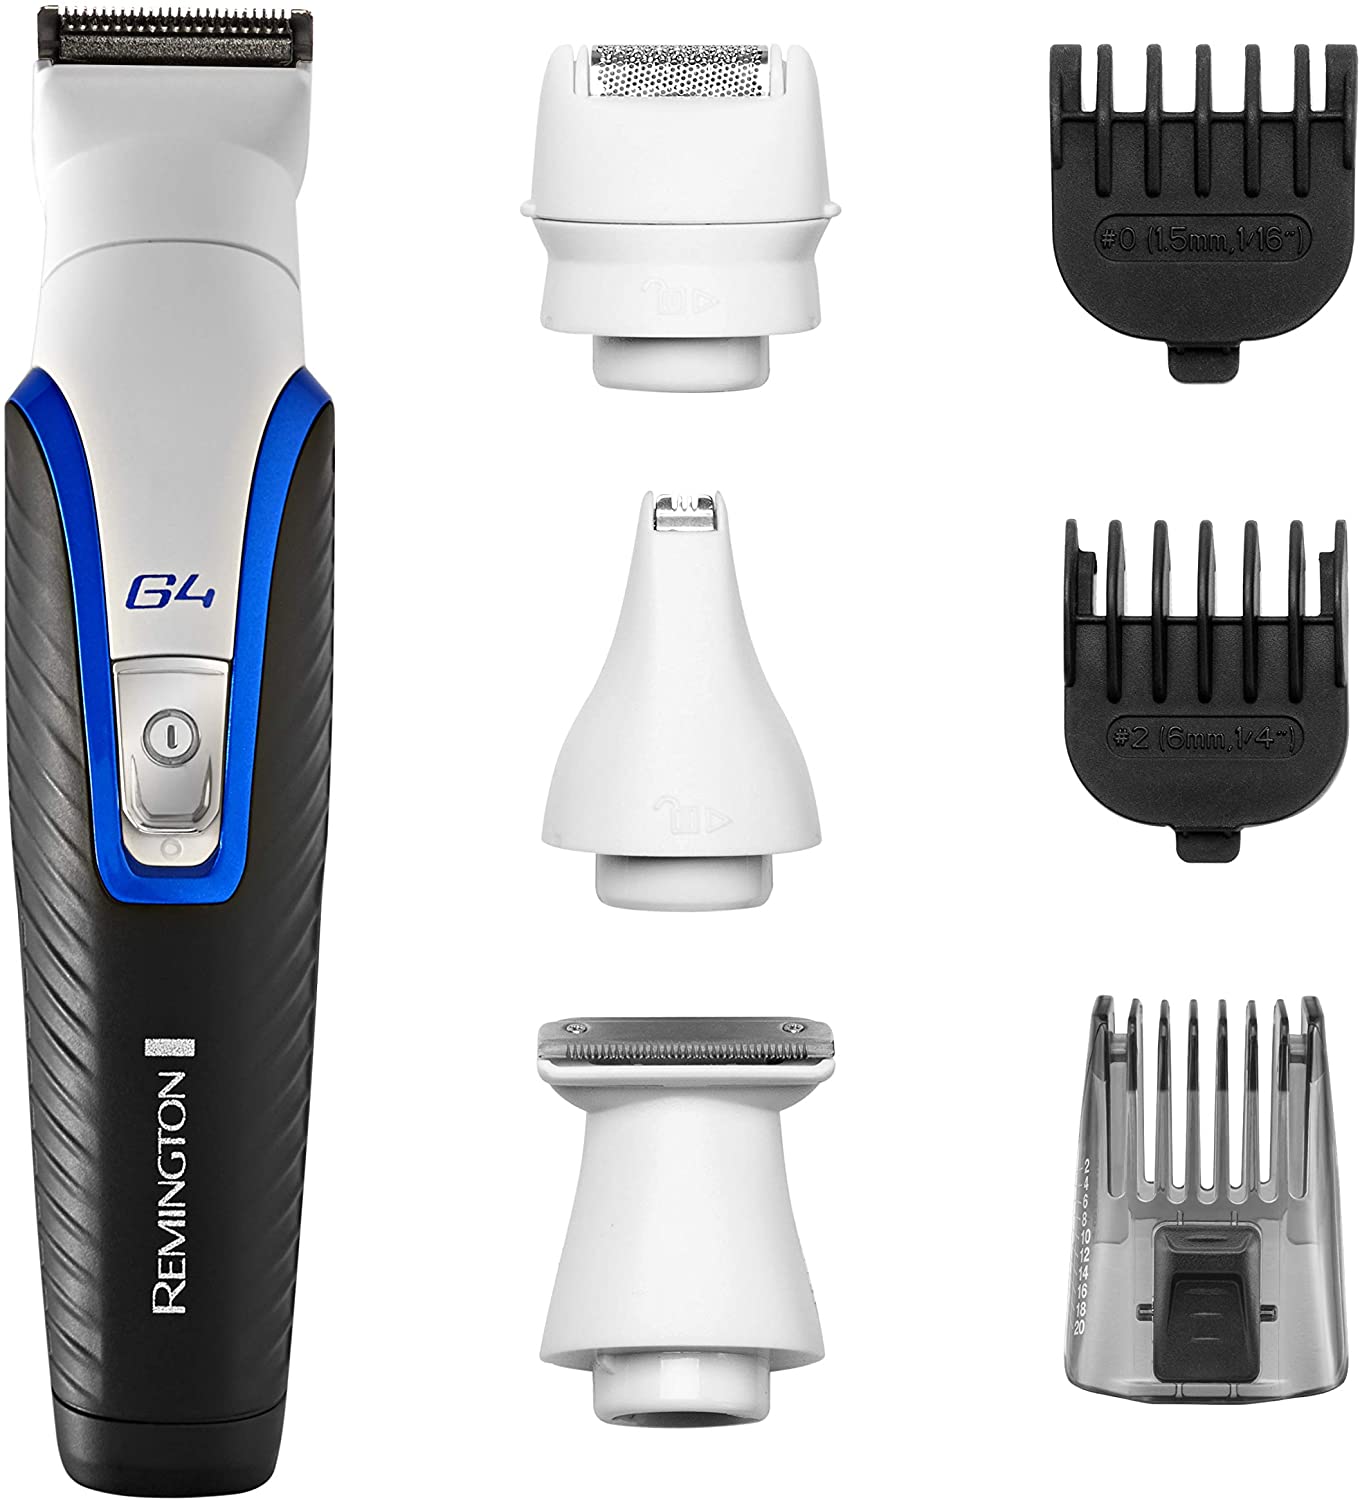 Buy Remington Graphite G4 Cordless Trimmer, All-in-One Beard, Body and  Stubble Trimmer with Mini Electric Shaver Attachment Online in UAE | Sharaf  DG